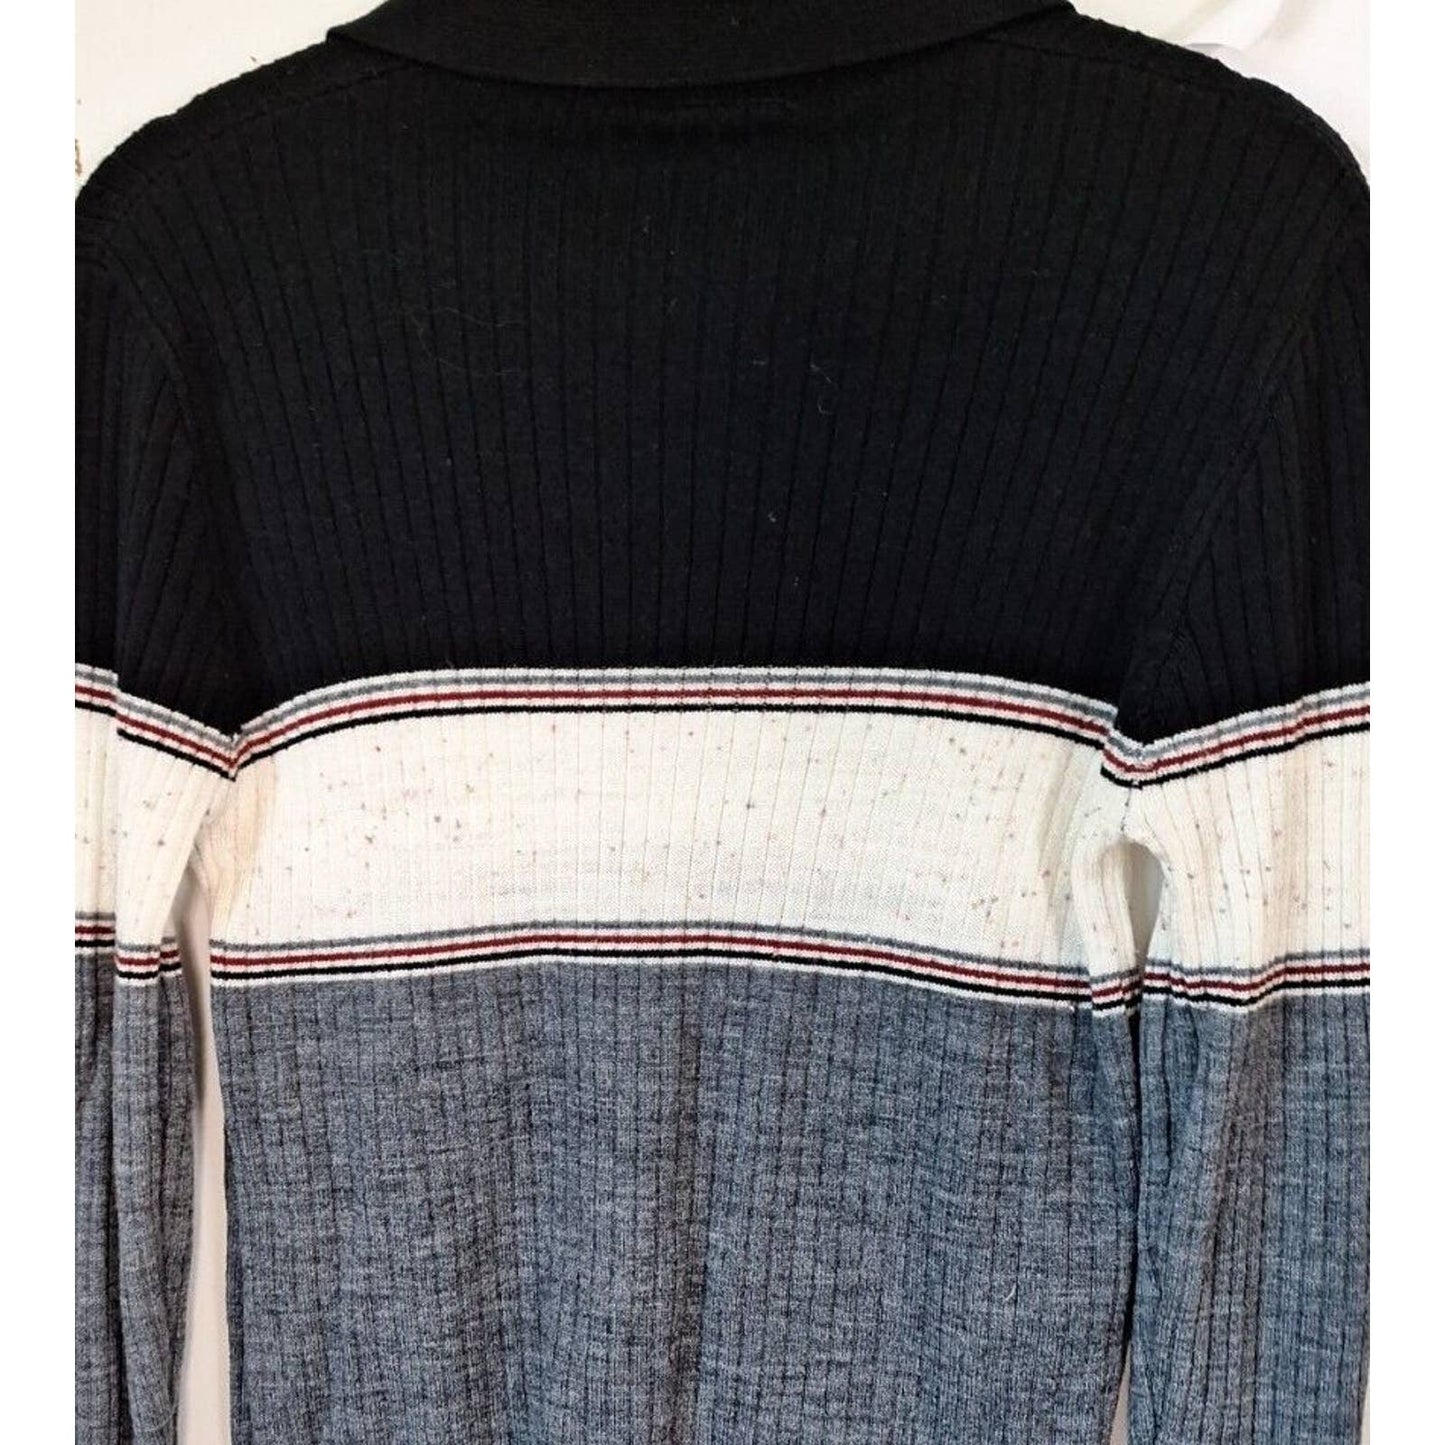 Vintage 70s Striped Ribbed Knit Collared Sweater Size Women Medium